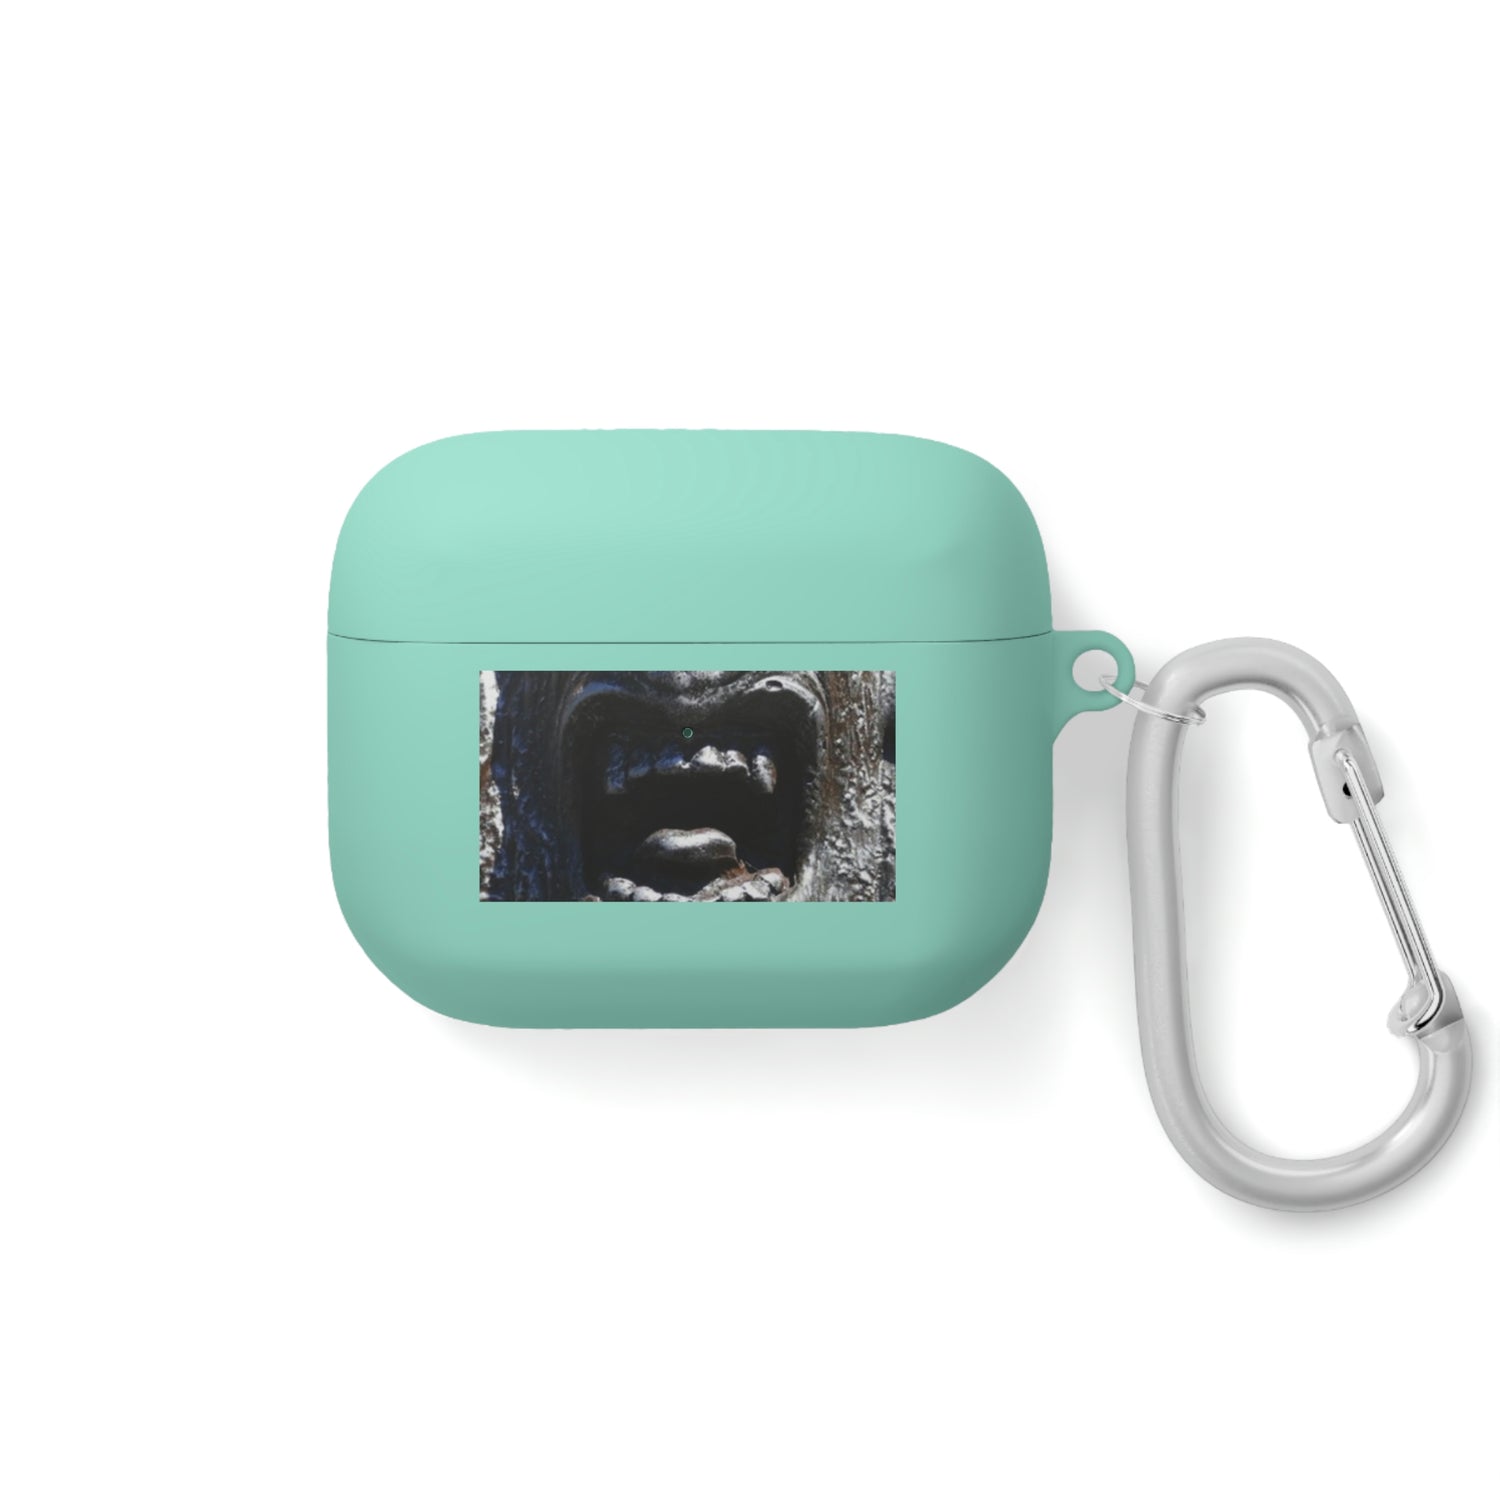 Frenzy Scream - AirPods and AirPods Pro Case Cover - Fry1Productions